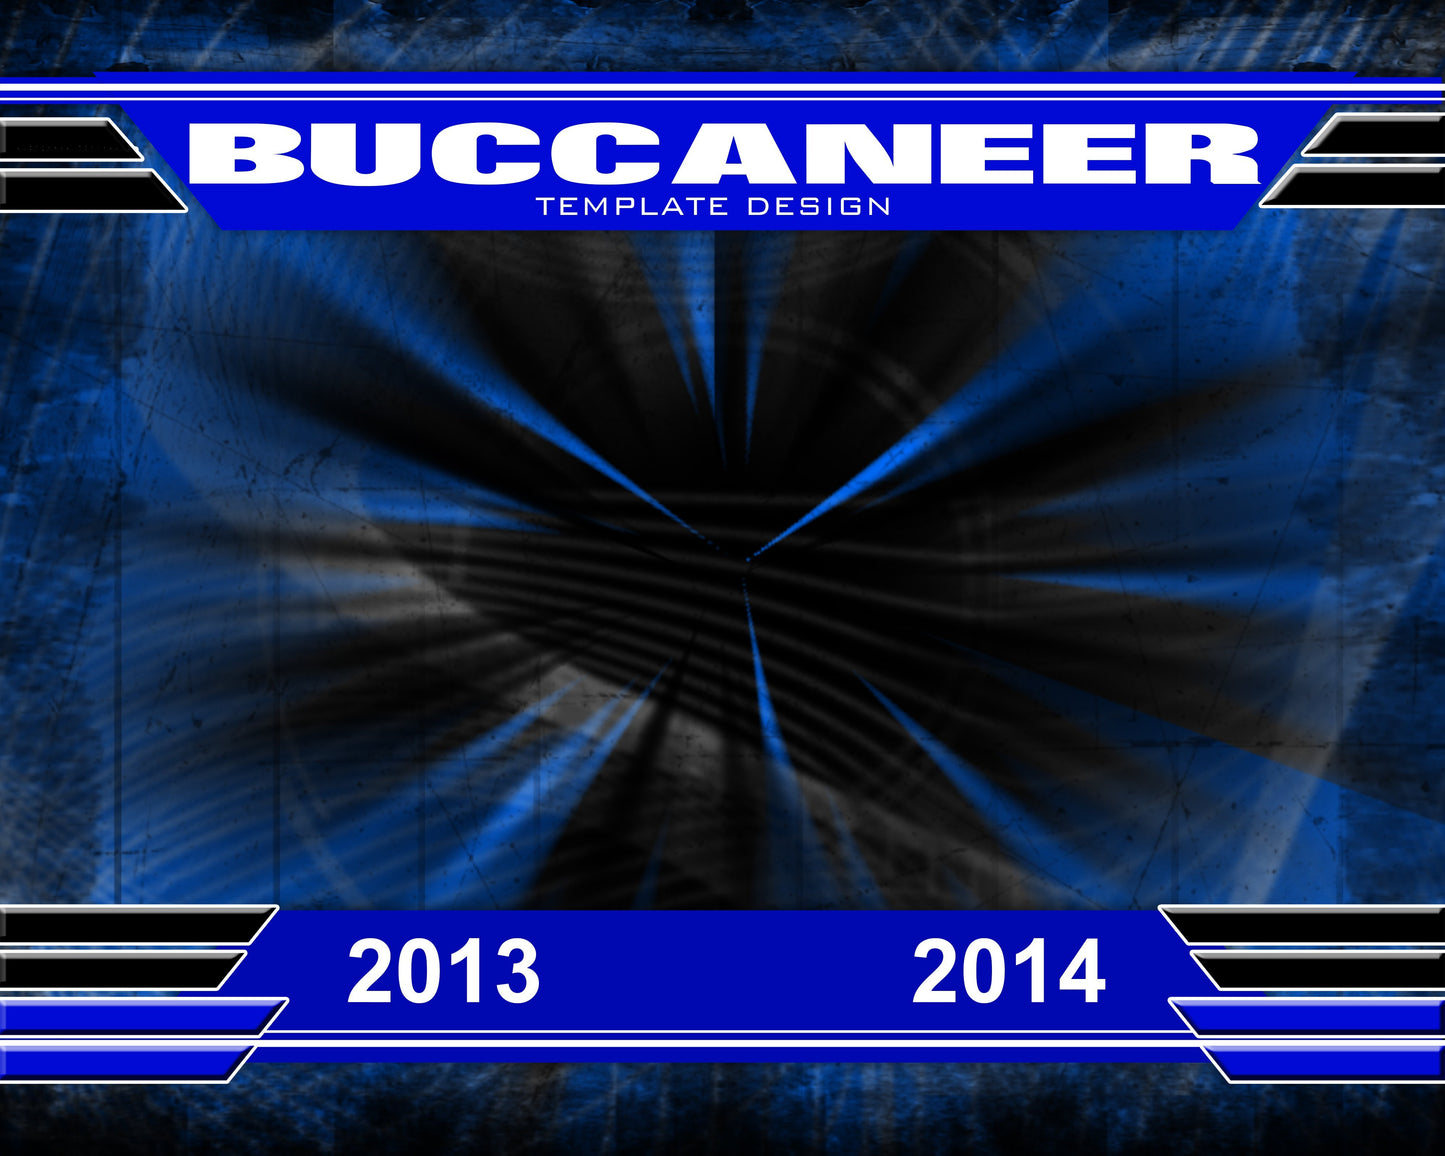 Buccaneer v.1 - Xtreme Team-Photoshop Template - Photo Solutions